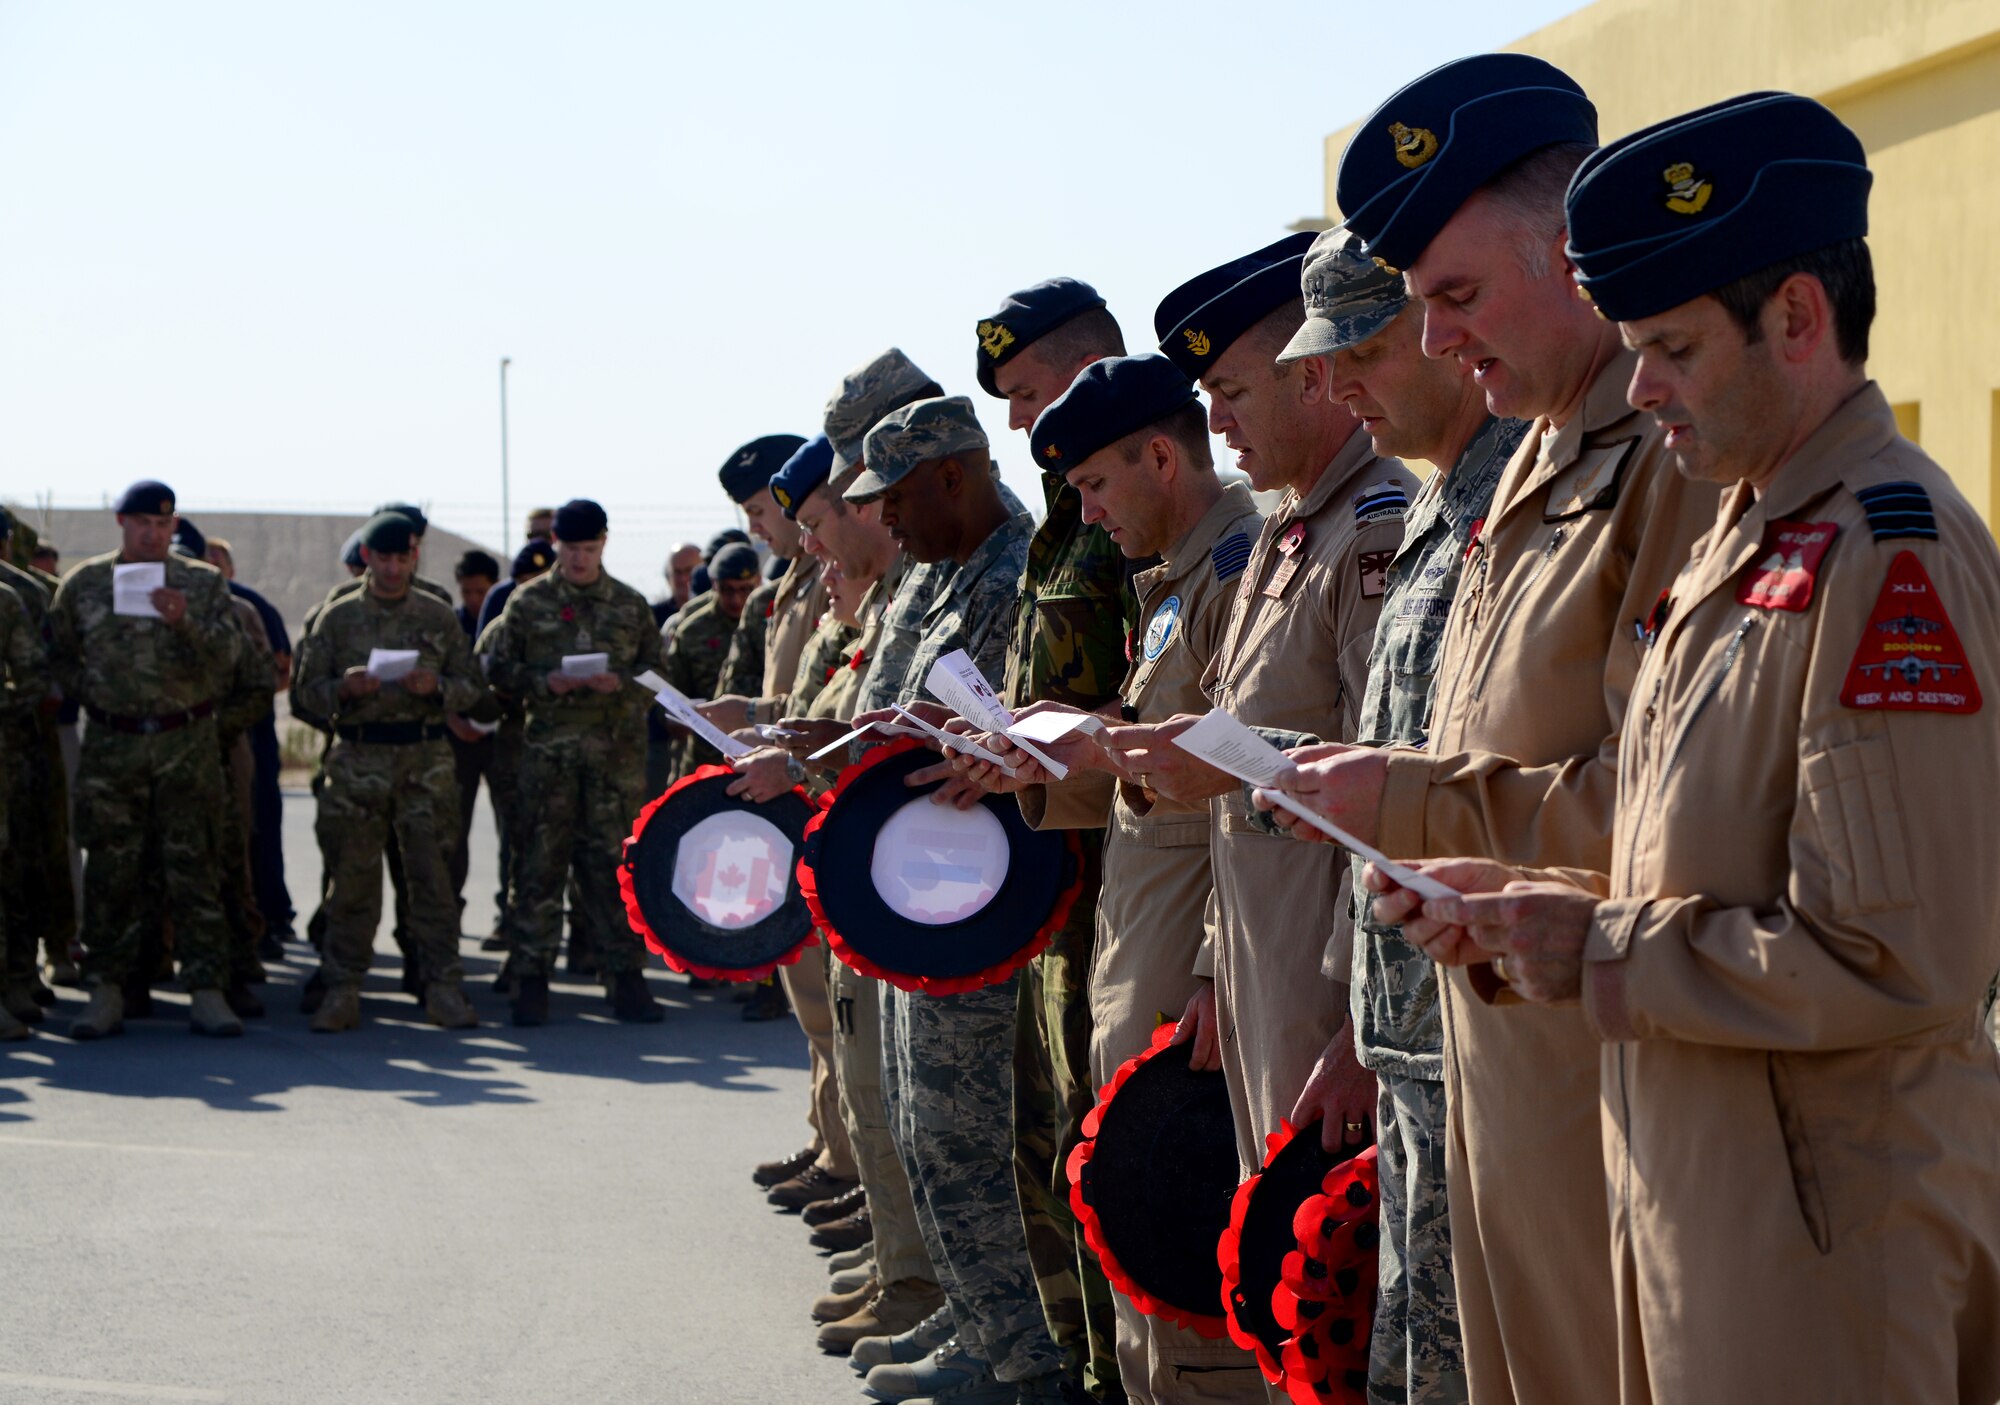 Military coalition partners stationed at Al Udeid Air Base, Qatar, participate in a Remembrance Day service here, Nov. 11, 2014. Members of many different branches of service from varying countries honored those who serve and have served the military in joint Remembrance and Veteran’s Day ceremonies. (U.S. Air Force photo by Senior Airman Kia Atkins)